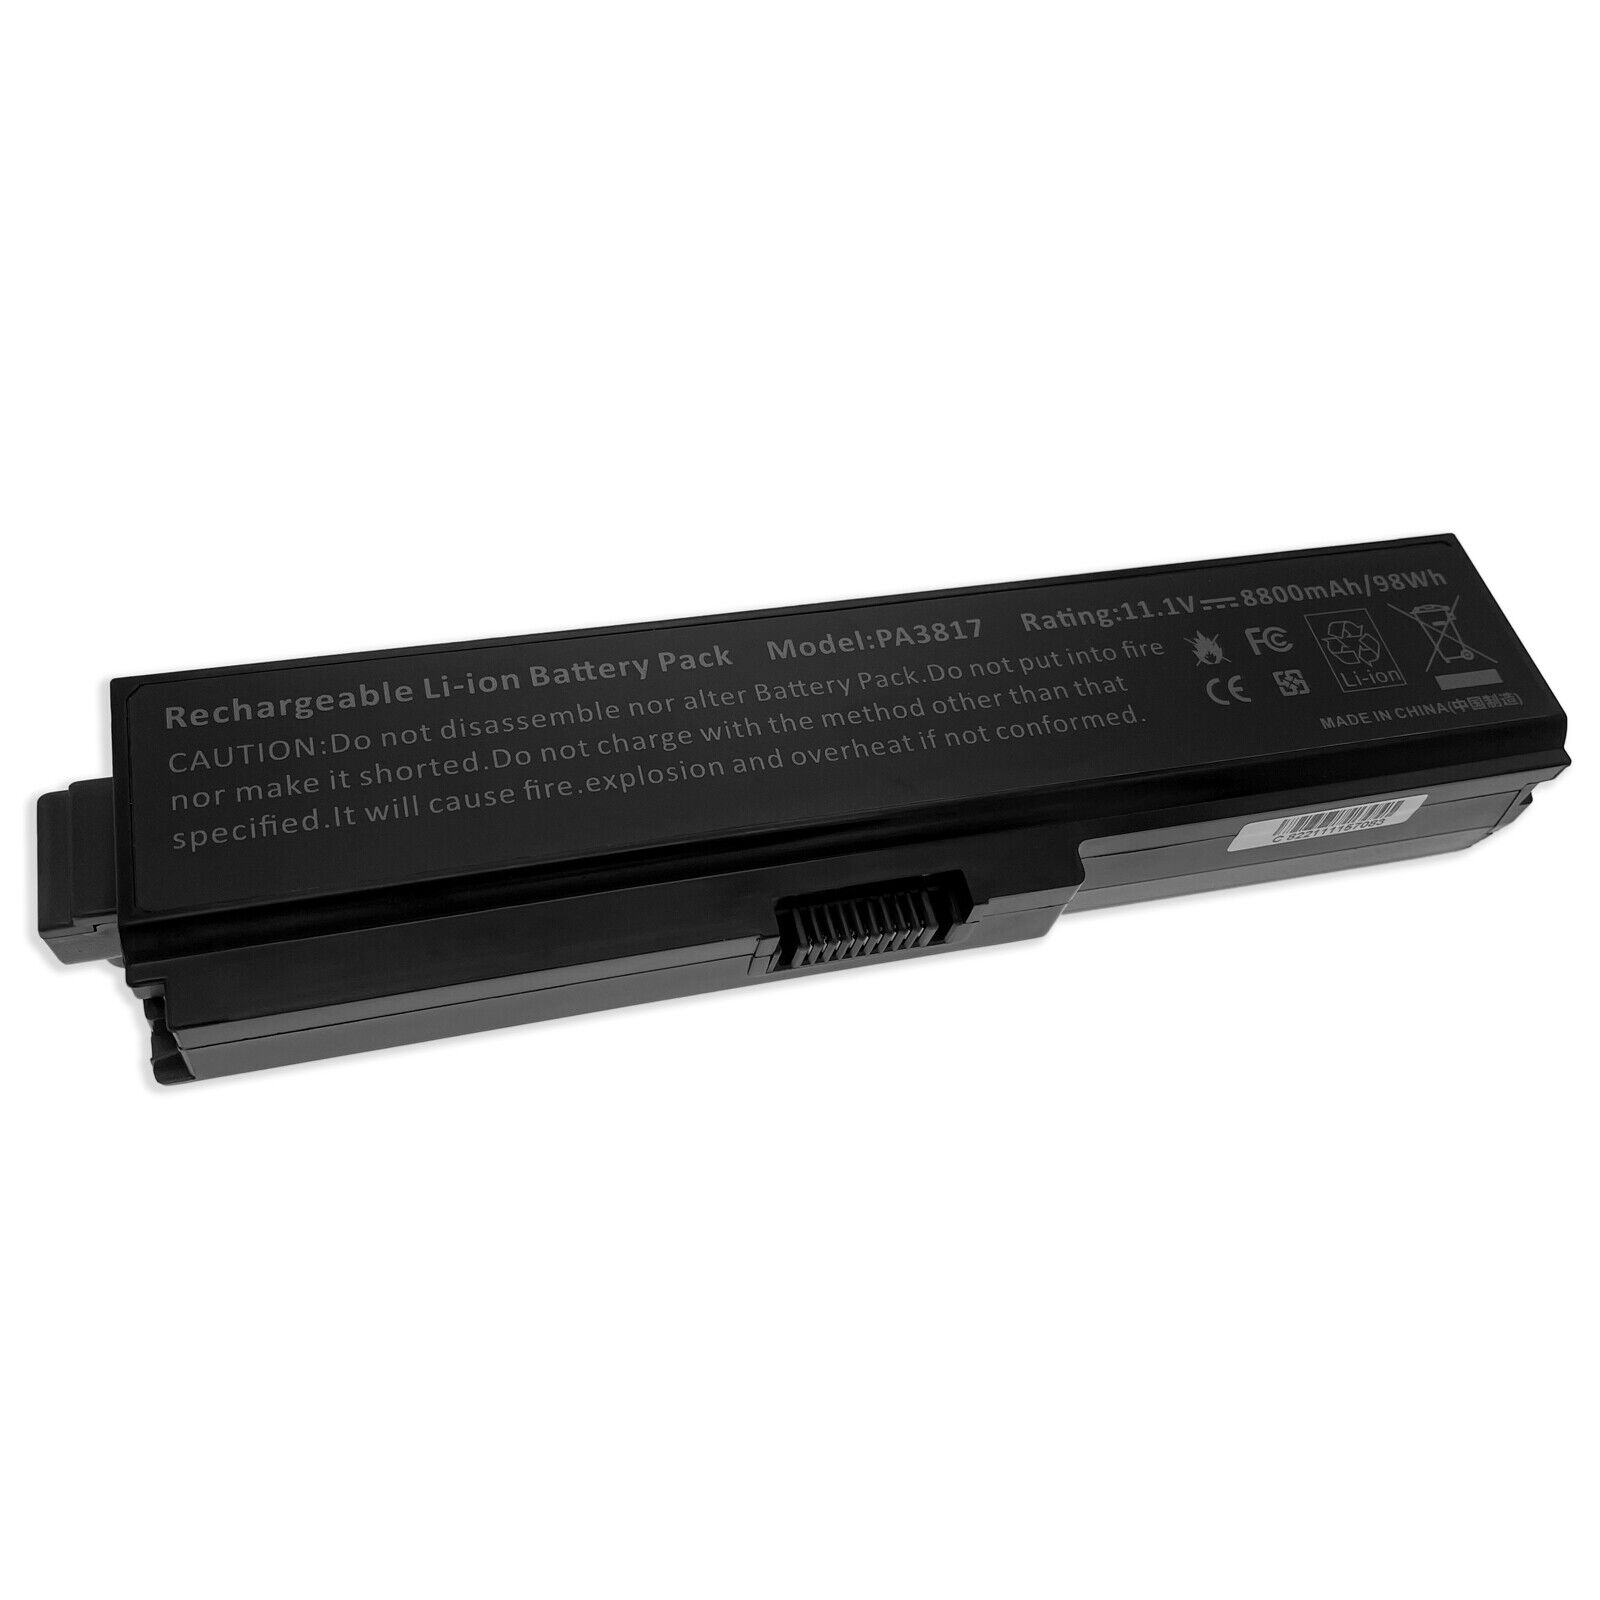 12 Cell Laptop Battery for Toshiba Satellite A665-S6085 A665-S6086 USA SALE